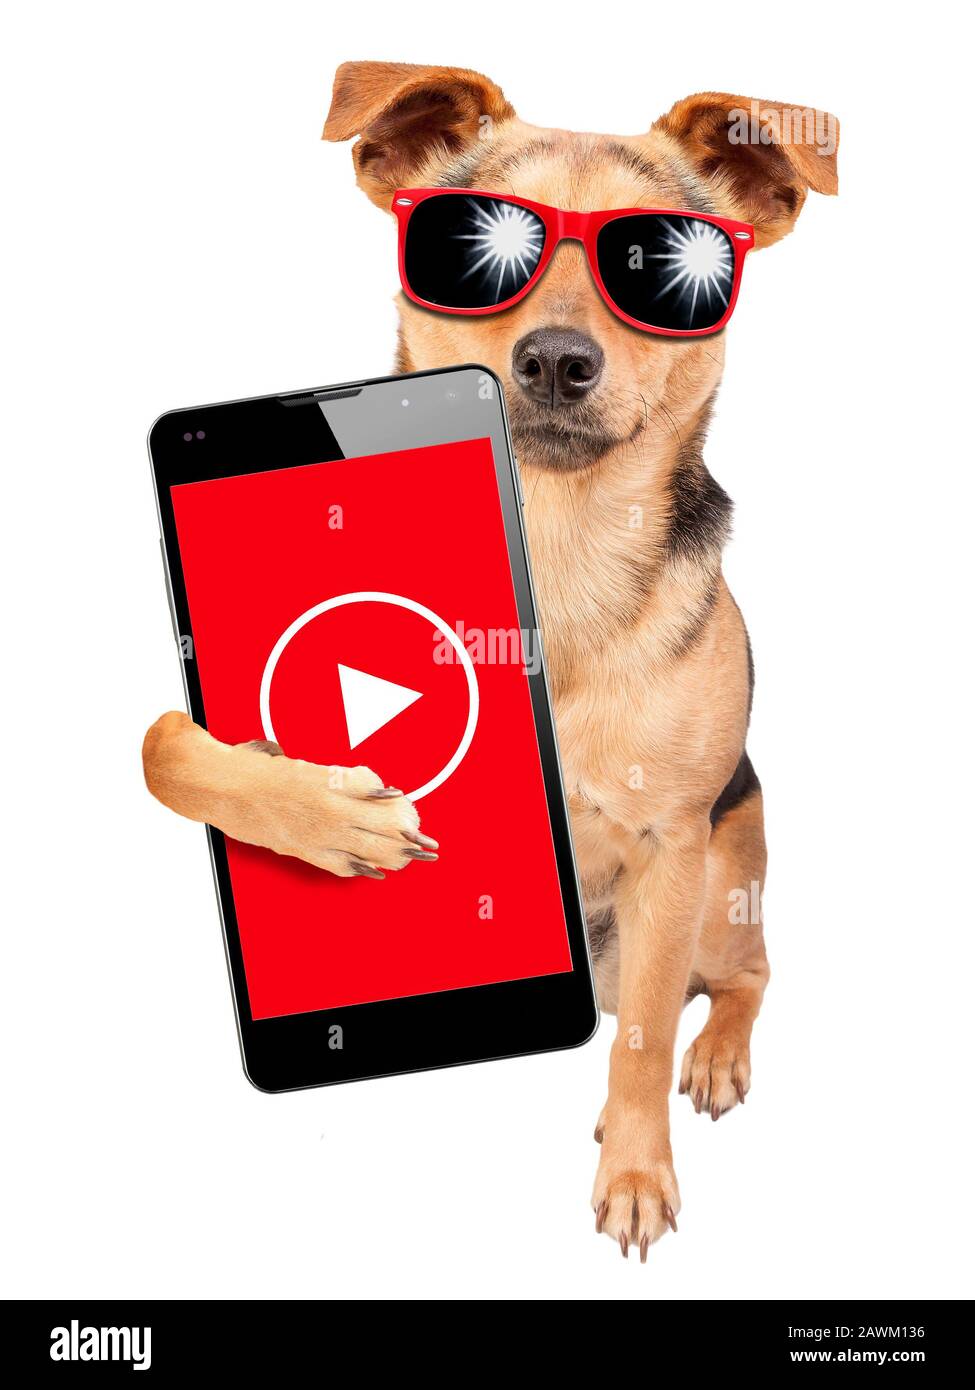 Funny dog influencer celebrity wearing sunglasses and under money dollars rain video content creator holding mobile phone isolated on white background Stock Photo